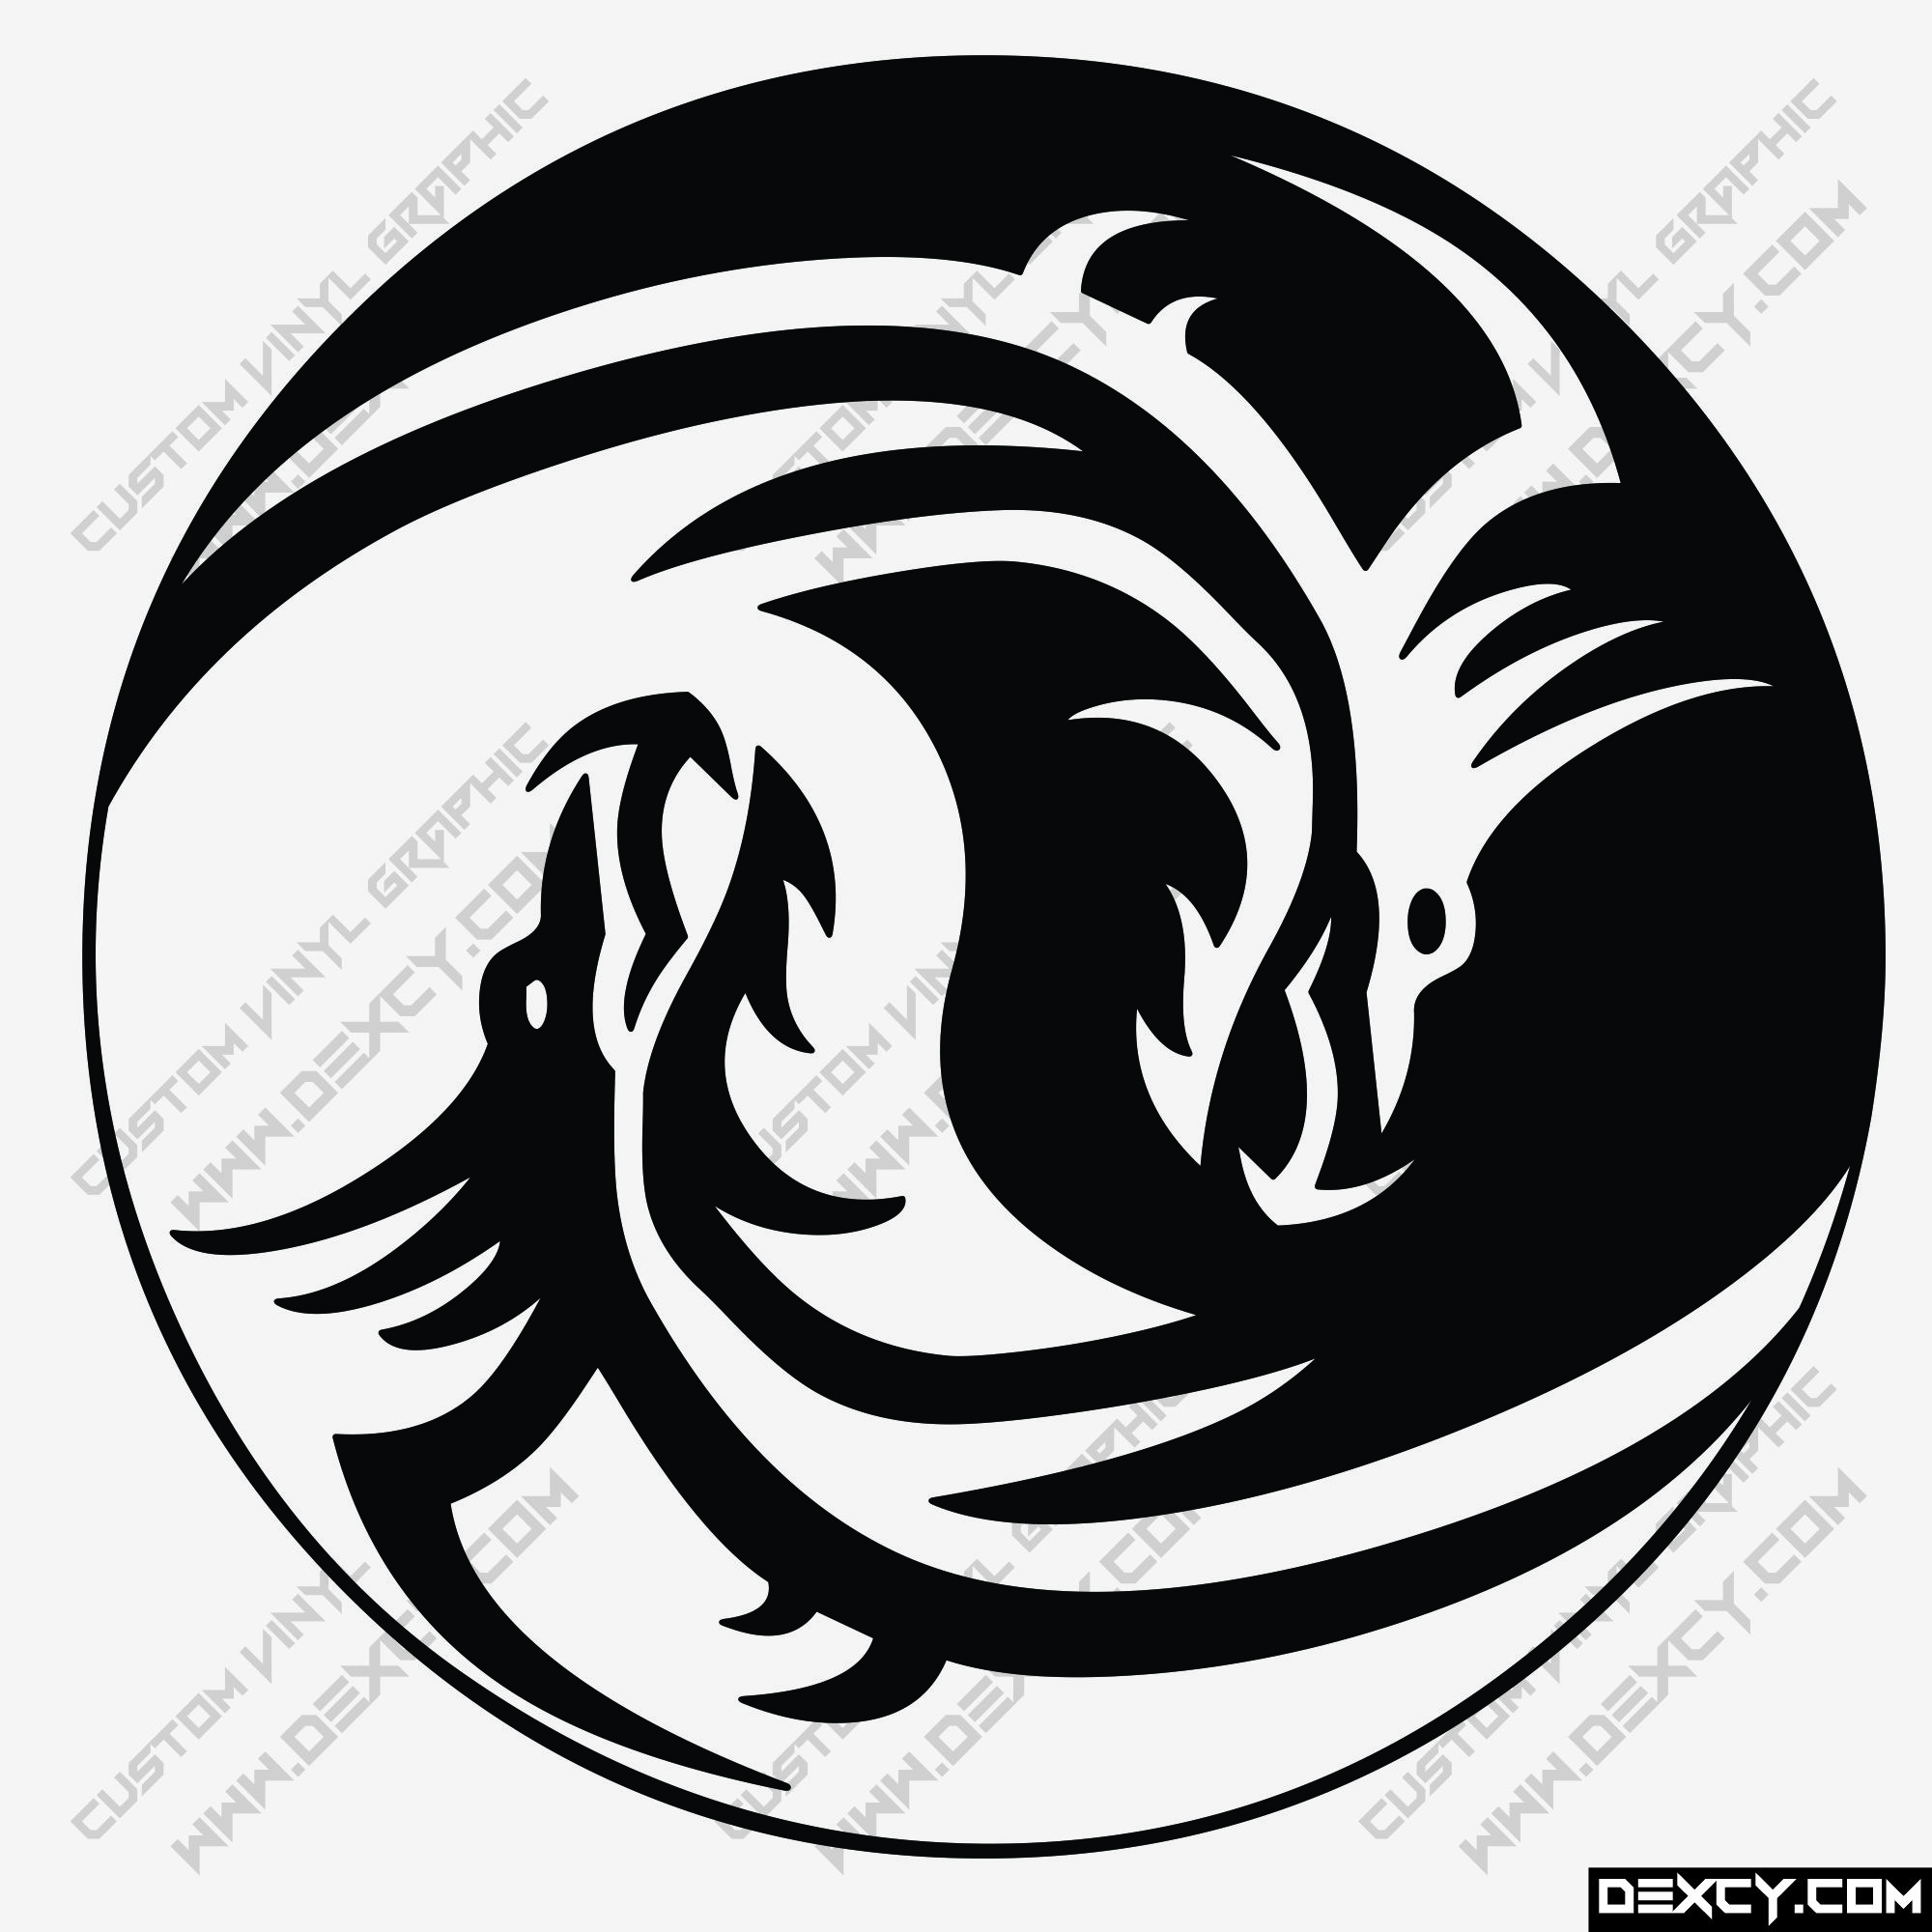 Details about   Dragon with Ying Yang Graphic Die Cut decal sticker Car Truck Boat Window 7" 